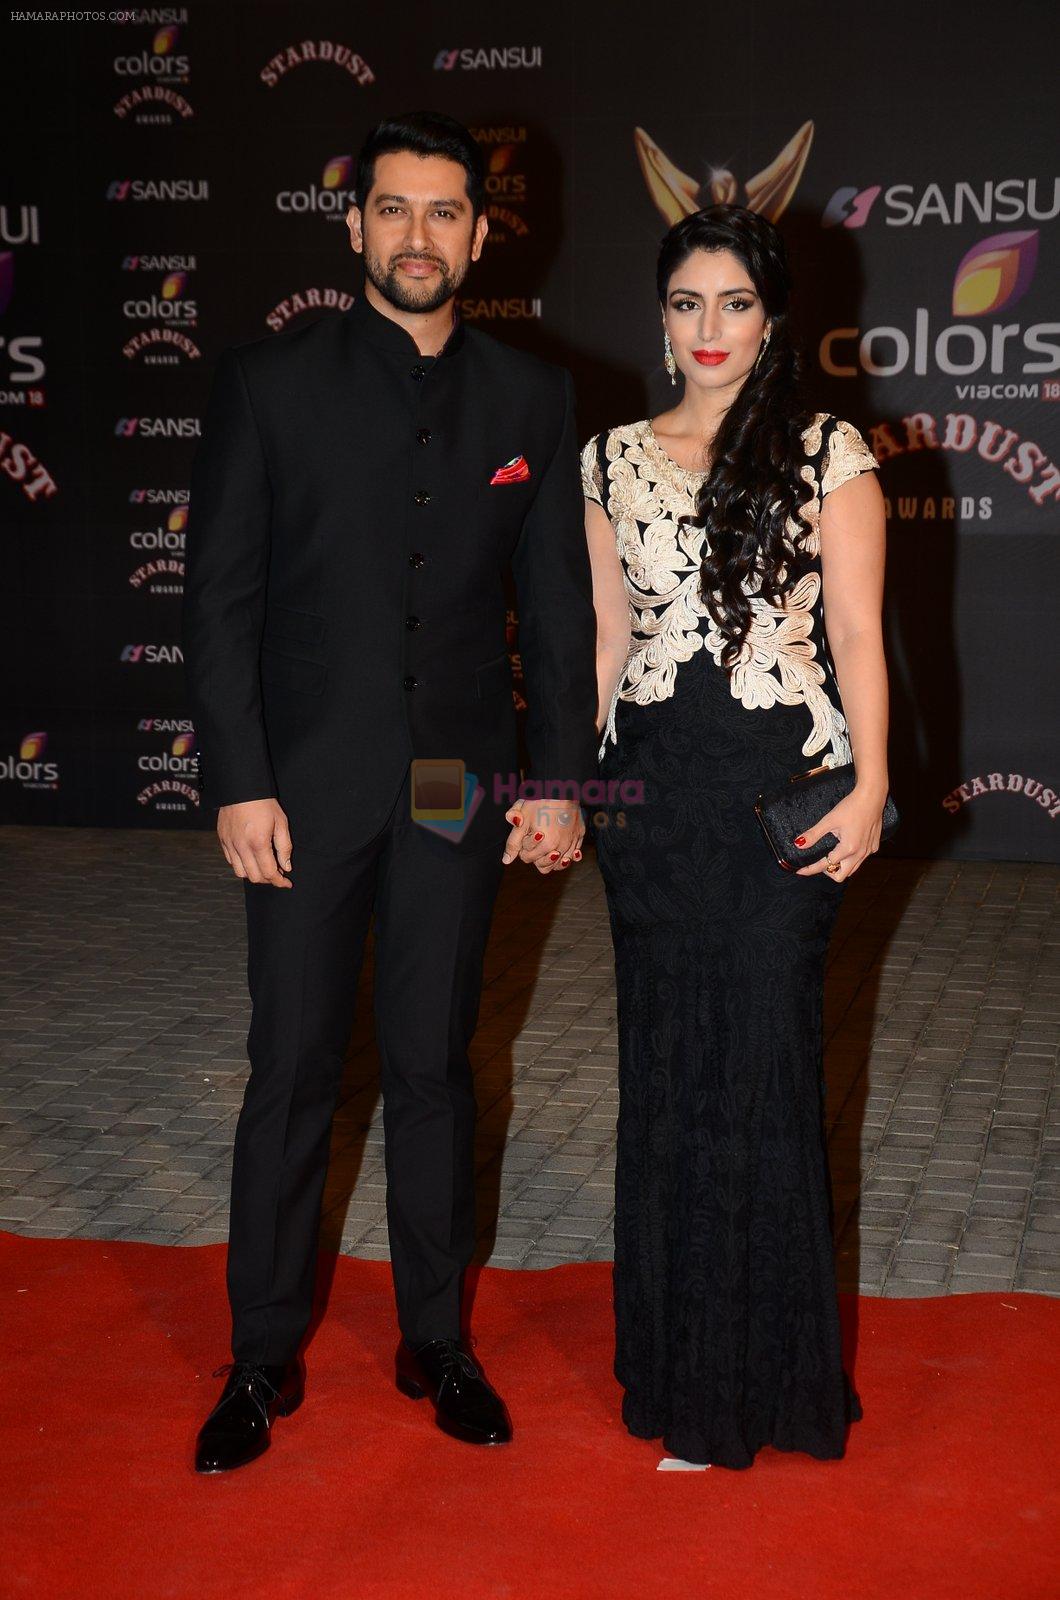 Aftab Shivdasani at the red carpet of Stardust awards on 21st Dec 2015